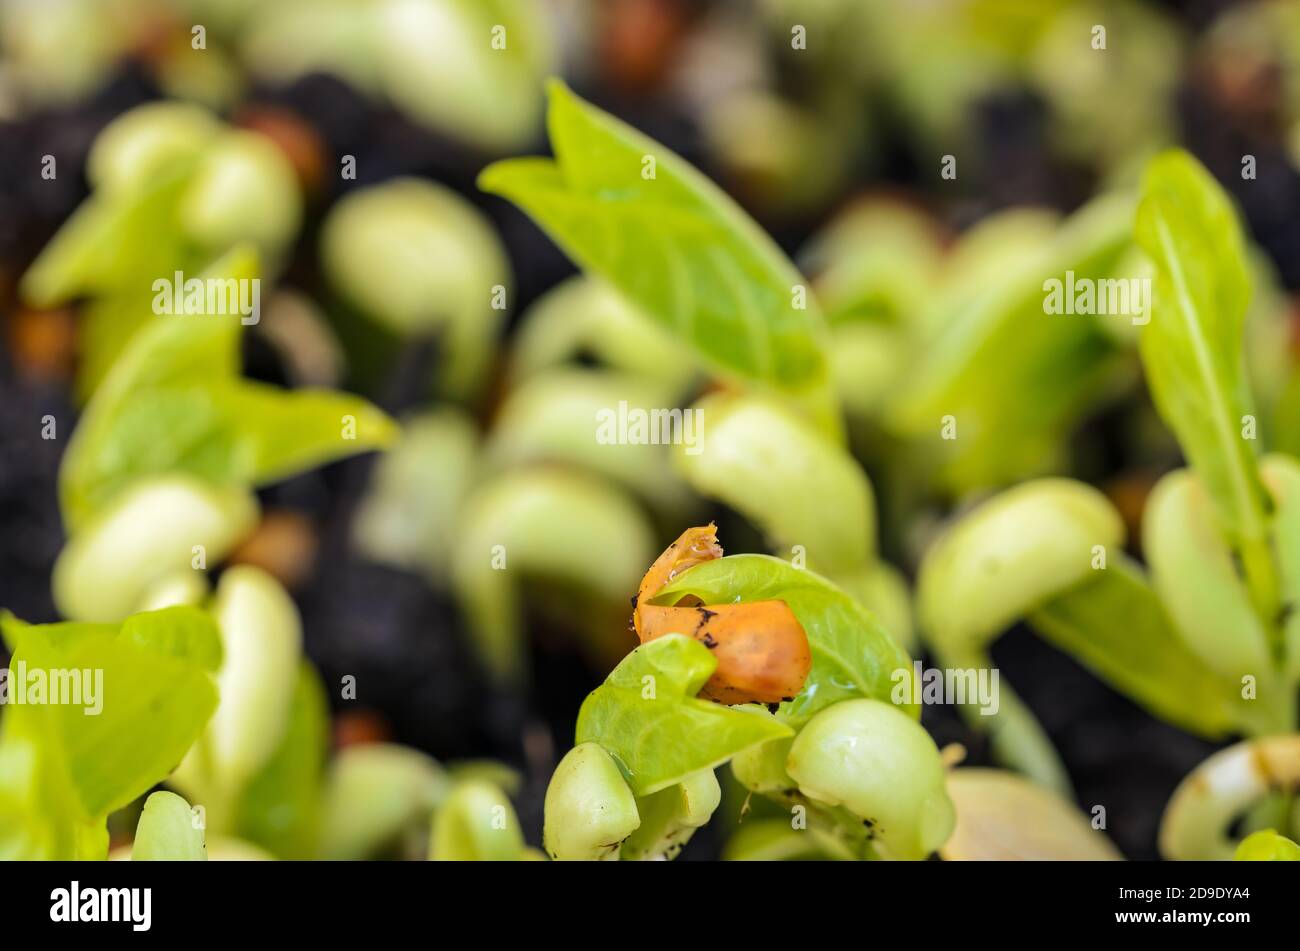 Fresh homegrown Micro greens sprouted from peas. Macro Shot. Stock Photo